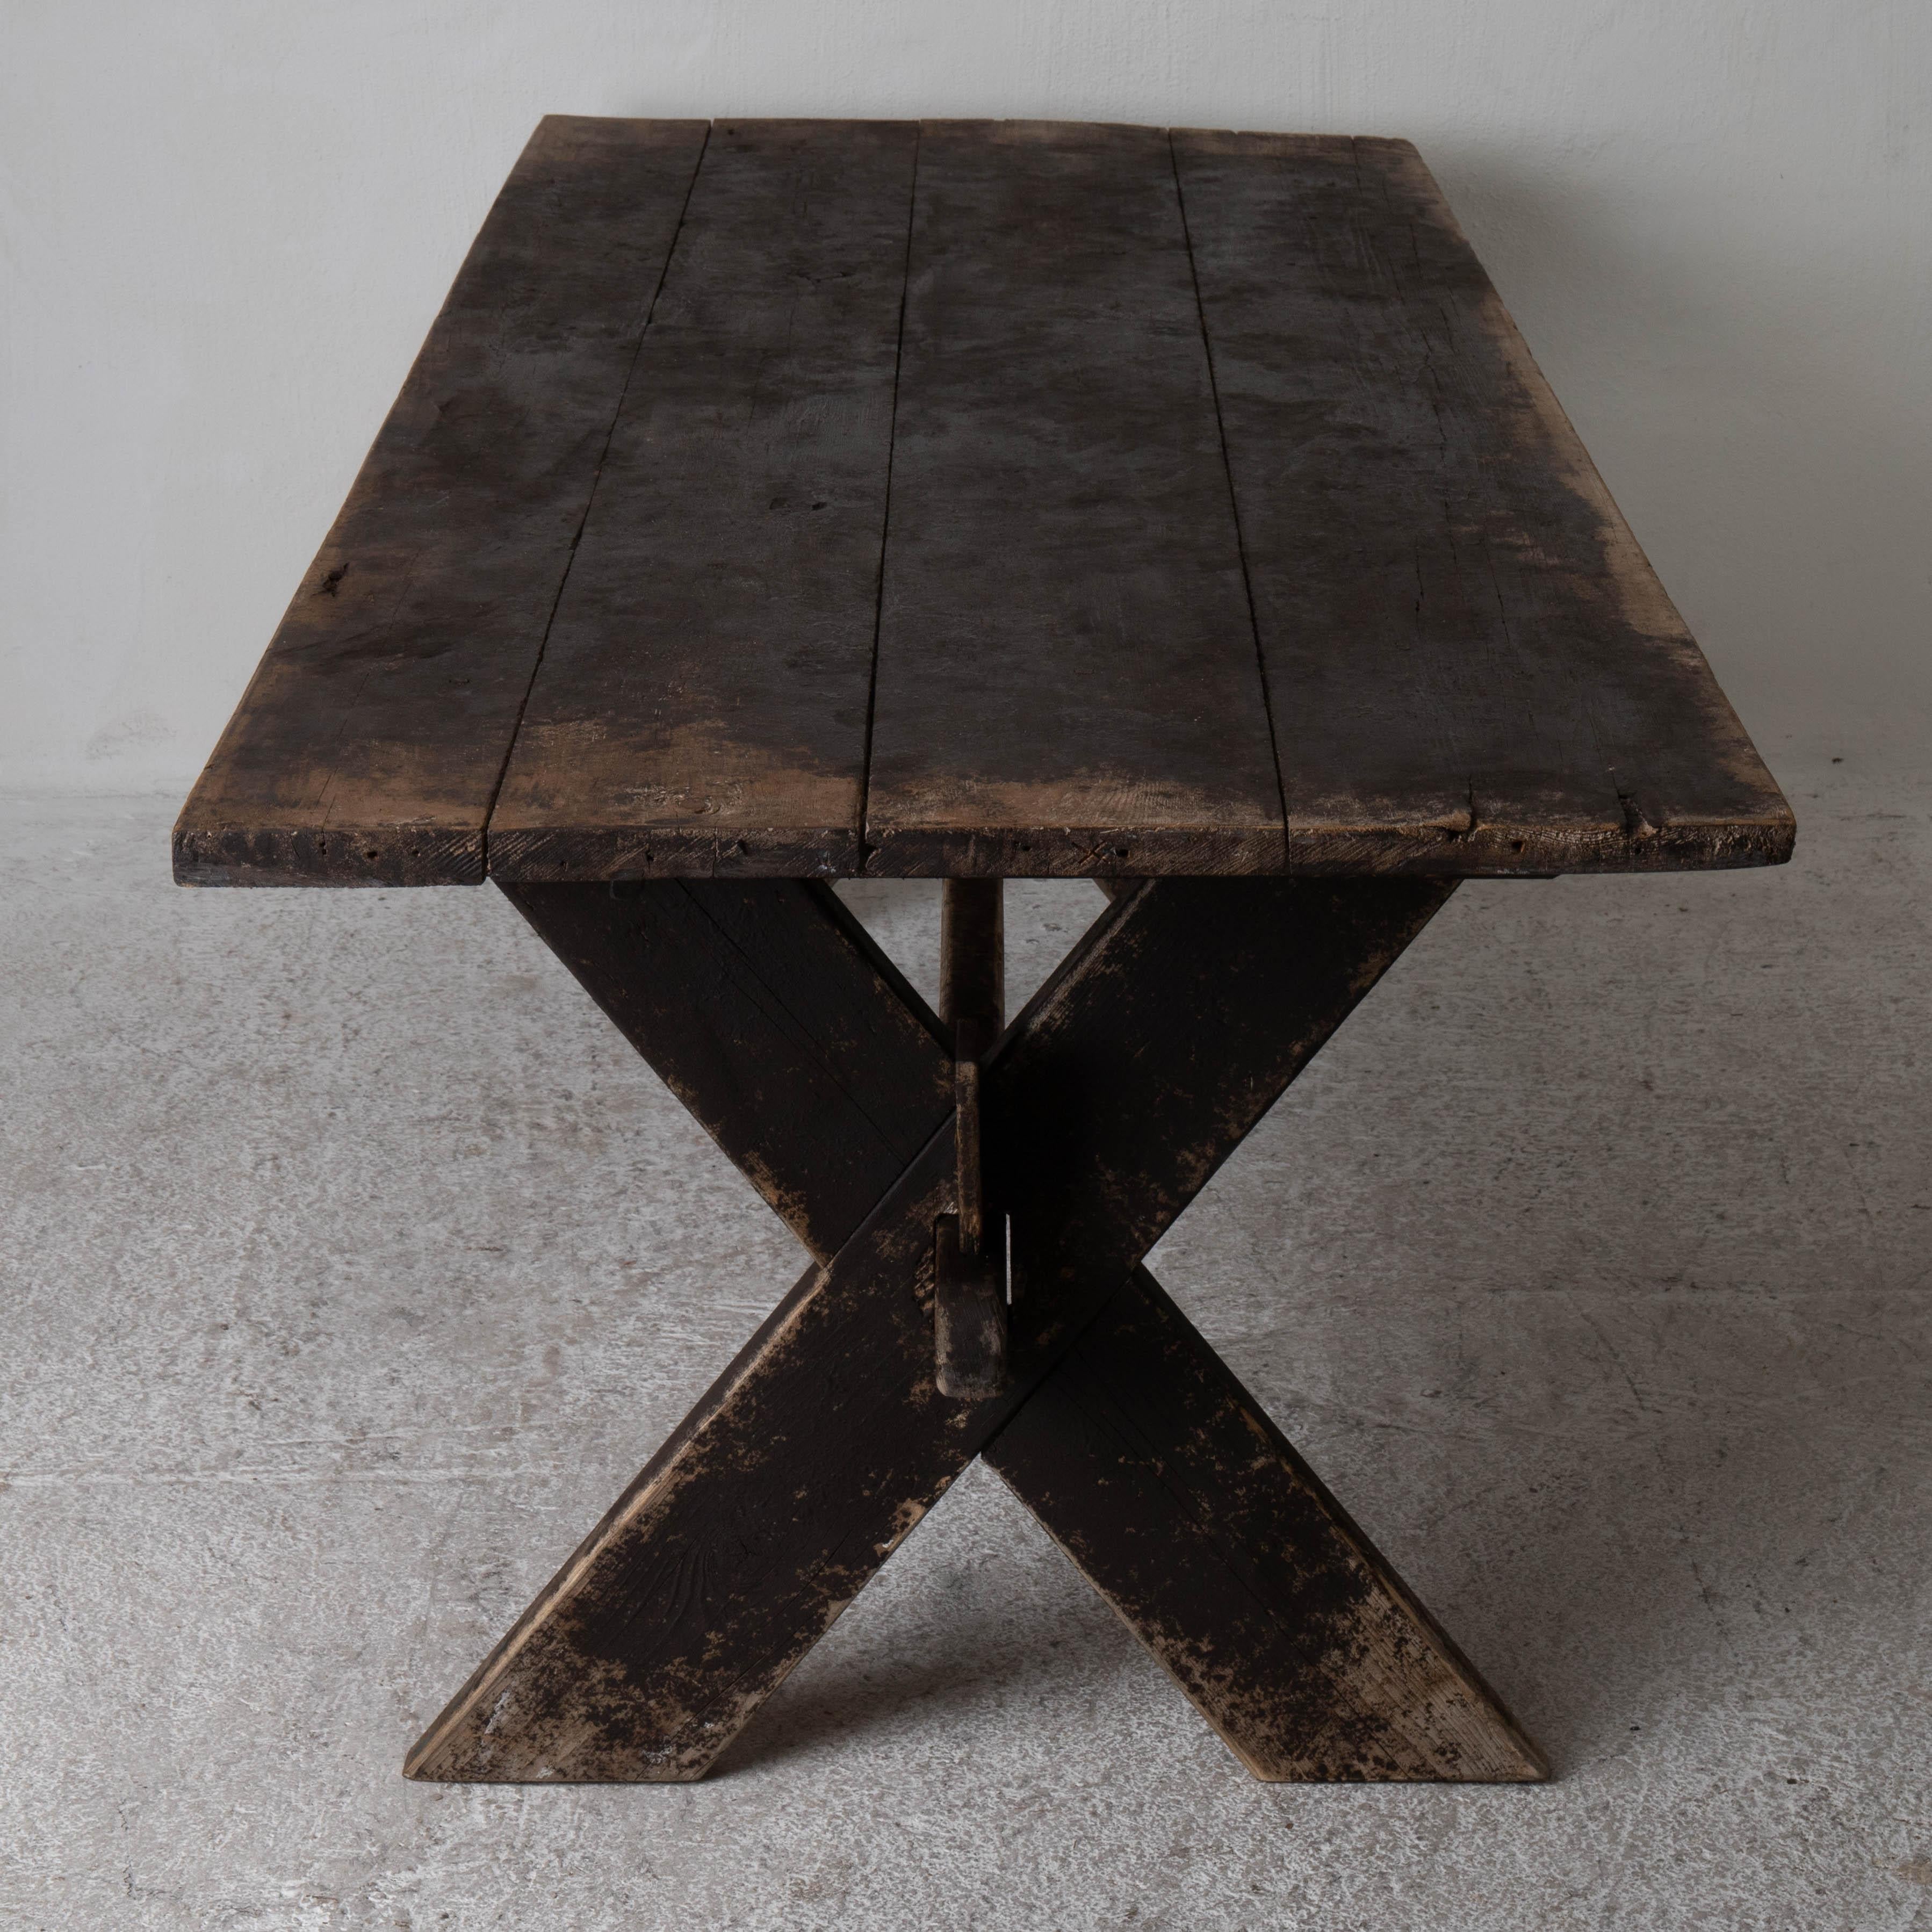 Wood Table Dining Trestle Table Swedish 19th Century Dark Brown Paint Sweden For Sale